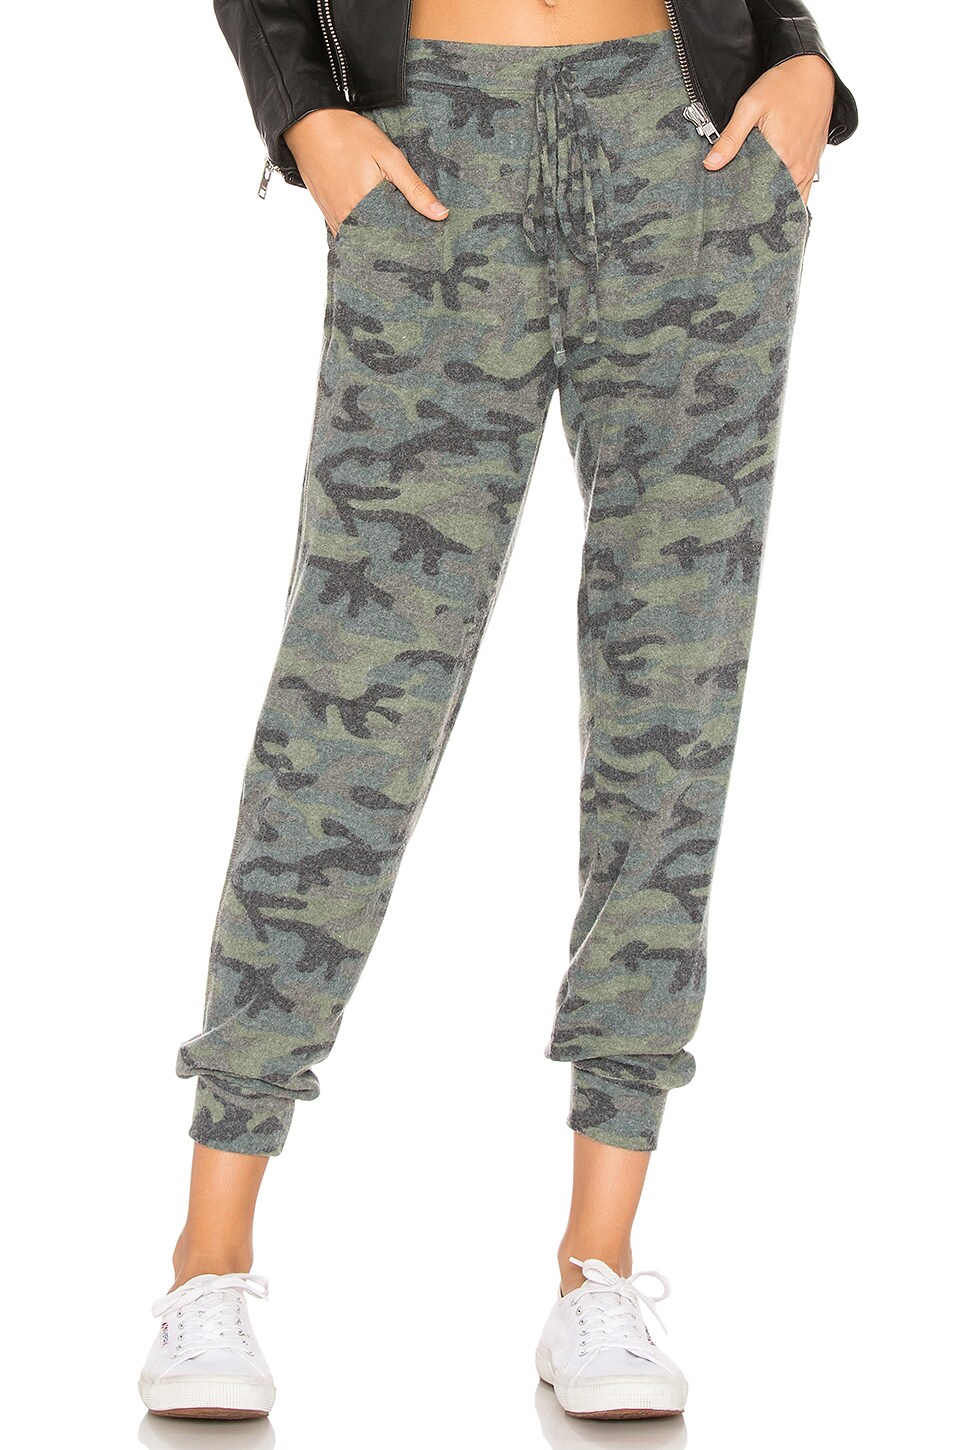 West Pant in Army. Revolve Women Clothing Pants Sweatpants 